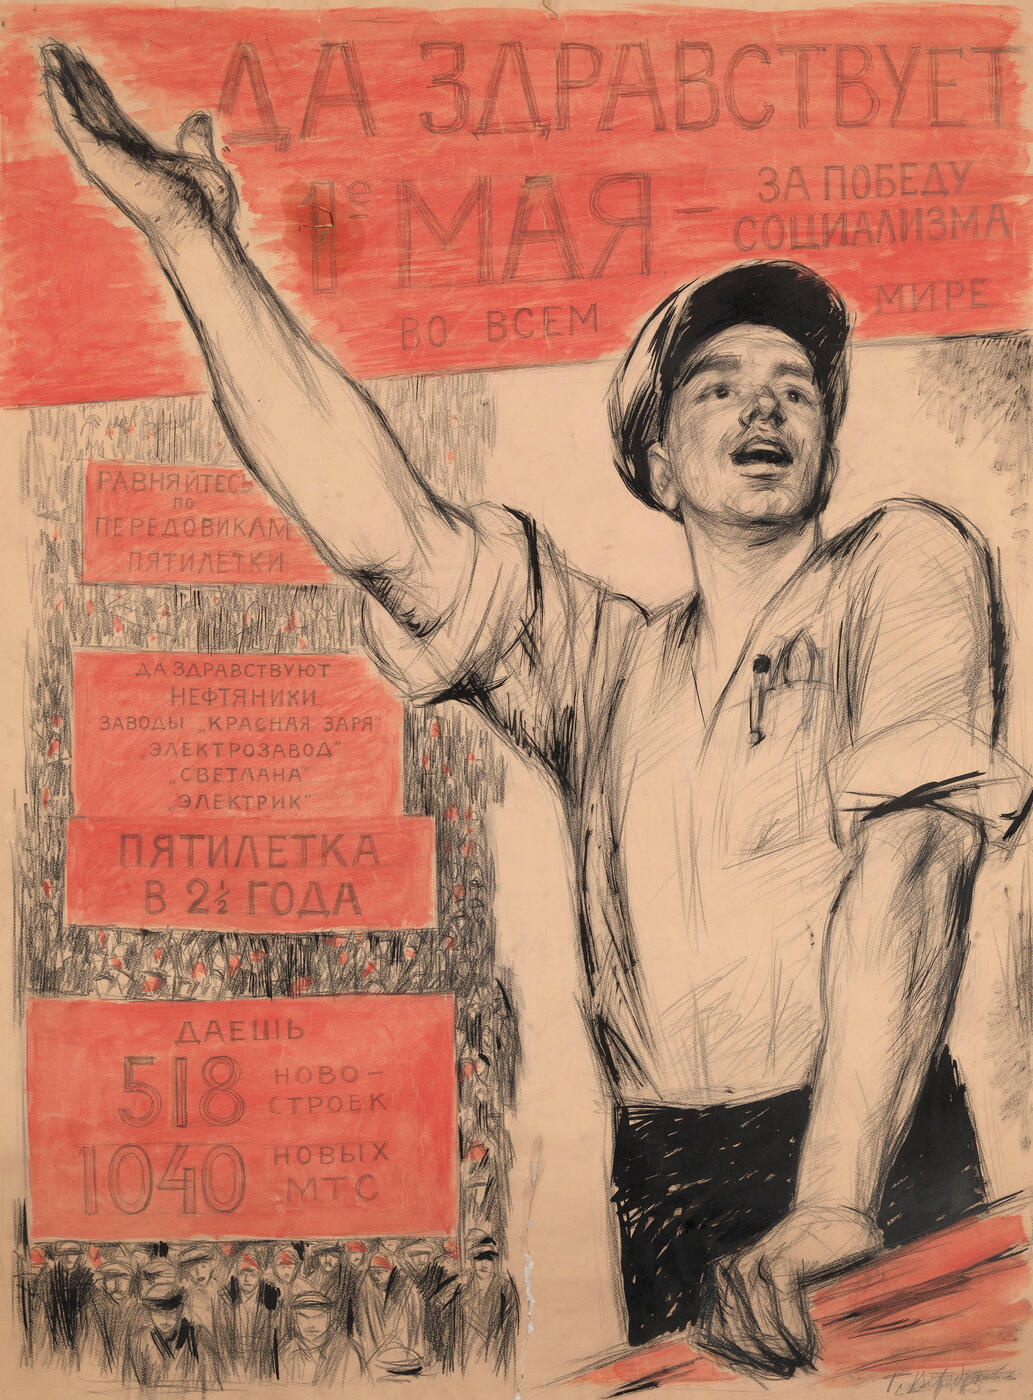 Poster Design, “Long Live May 1st”